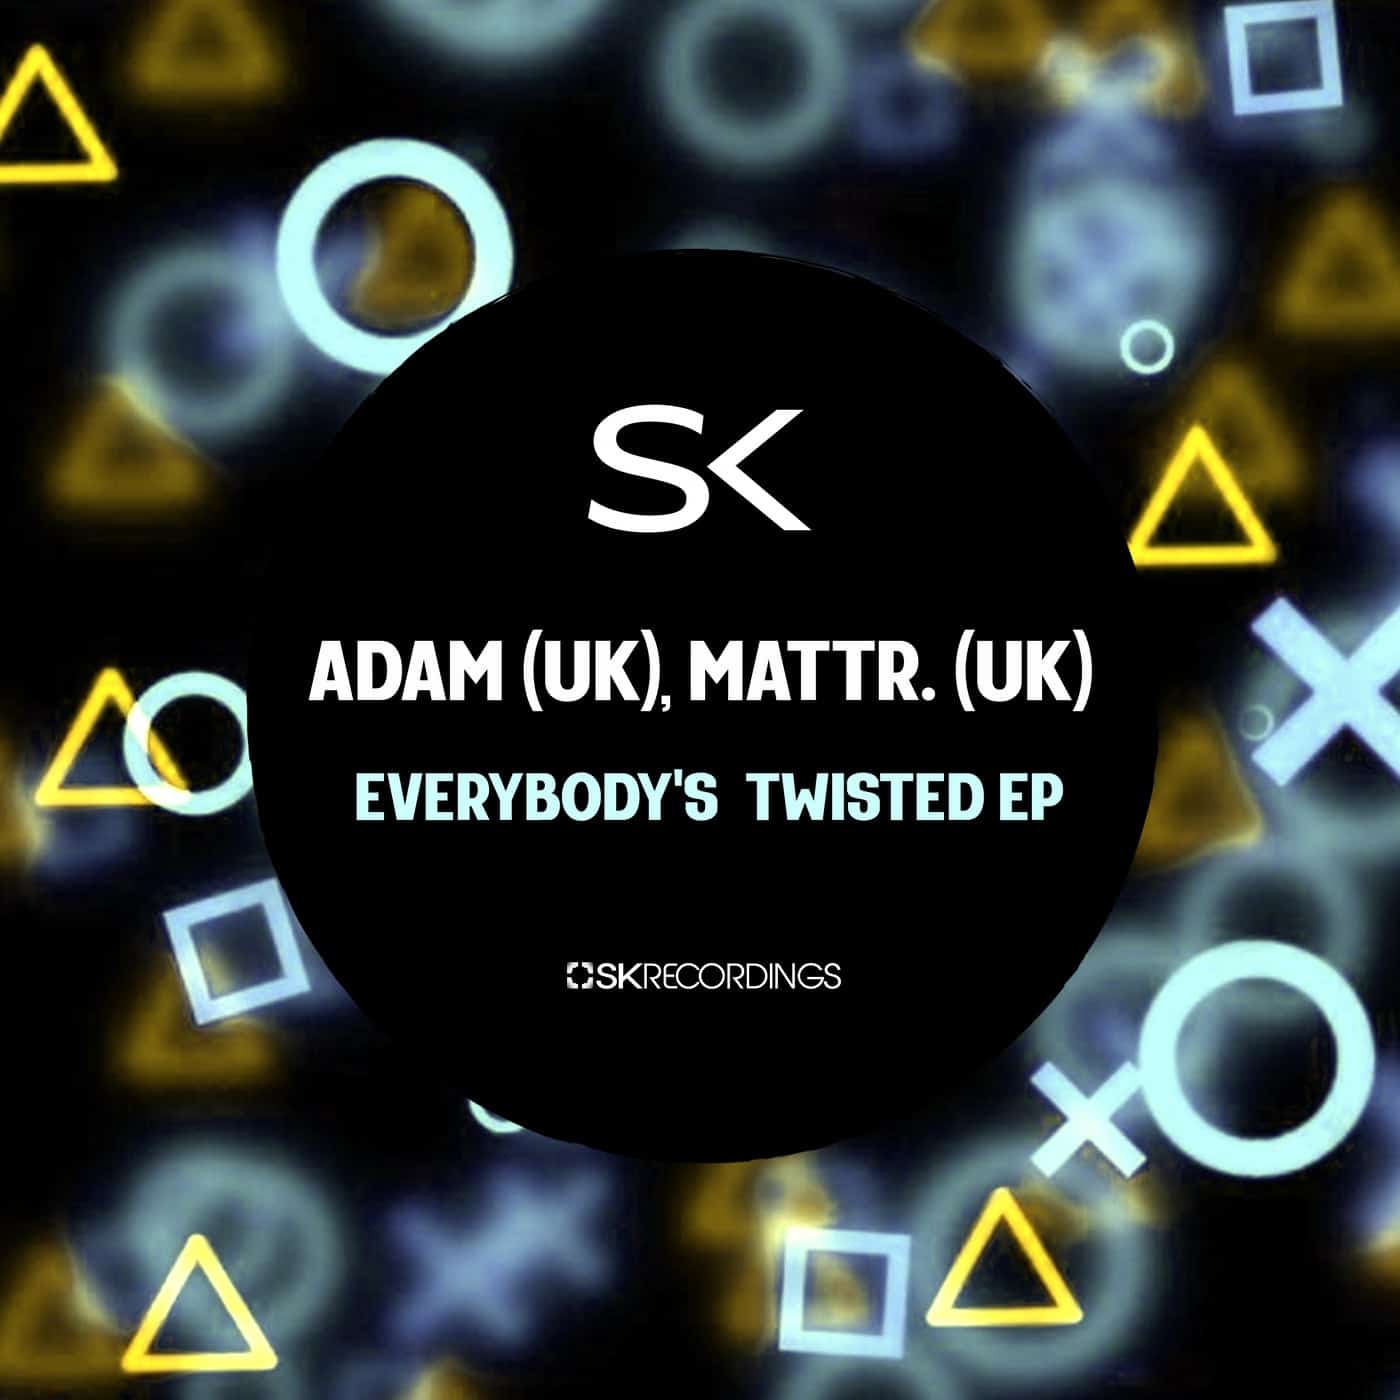 image cover: Everybody's Twisted by Mattr. (UK), Adam (UK) on SK Recordings